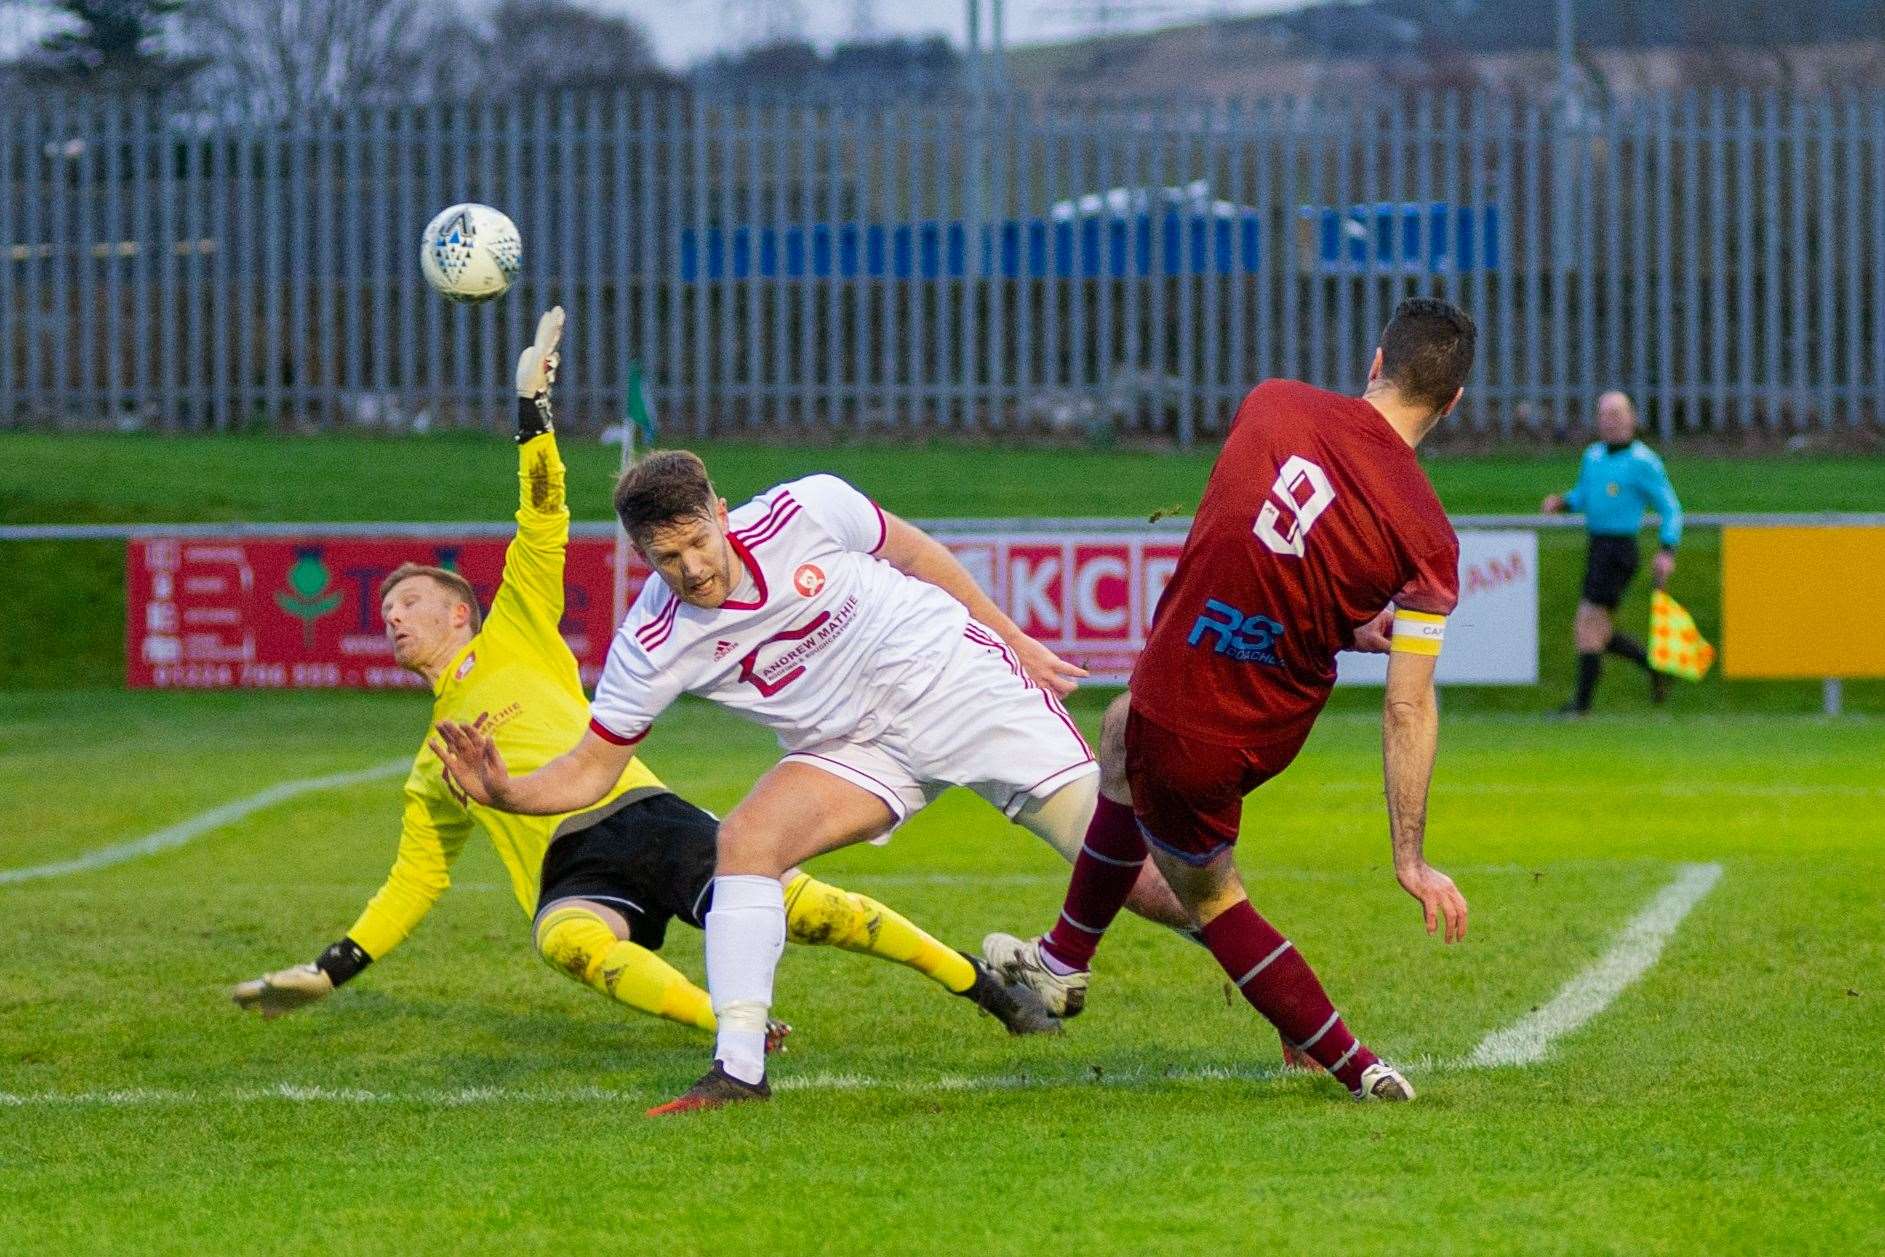 Keith forward Cammy Keith opens the scoring past Beath defender Kevin Connors and goalkeeper Stuart Hall...Keith FC (2) vs Hill of Beath Hawthorn FC (2) - Keith FC win 4-2 after extra time - Scottish Cup First Round - Kynoch Park, 26/12/2020...Picture: Daniel Forsyth..